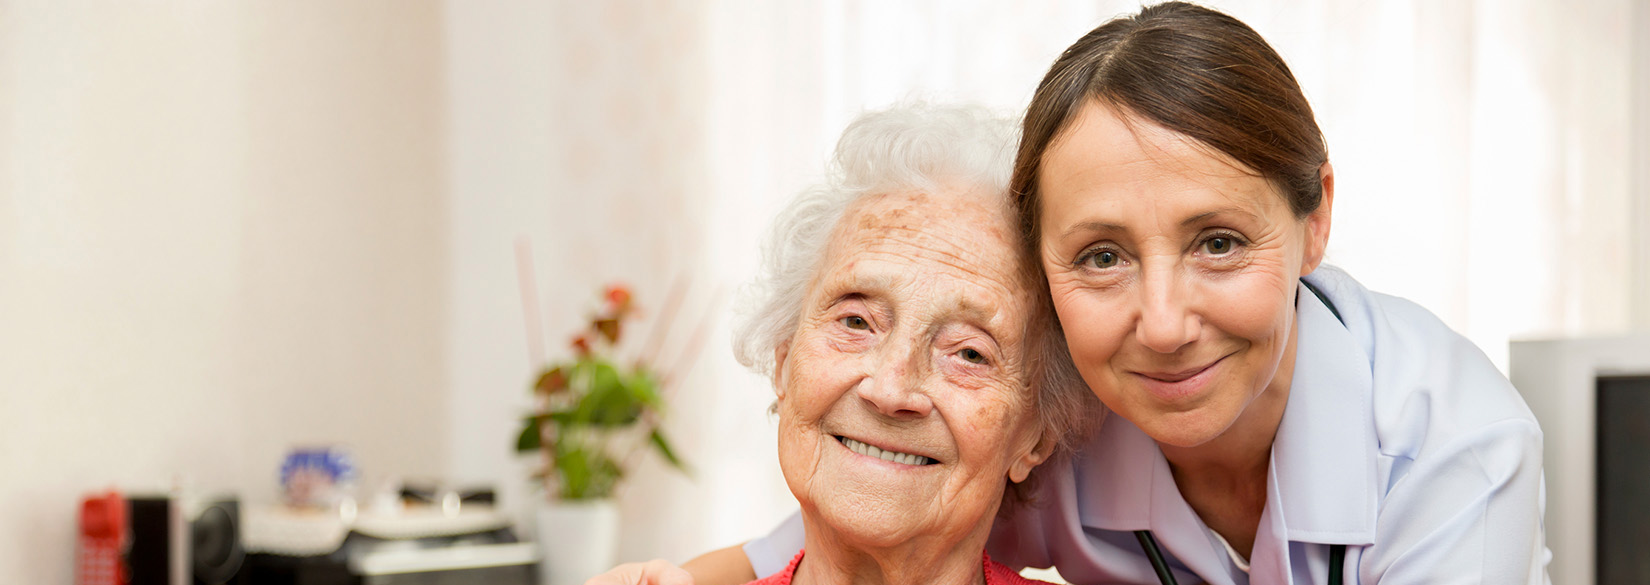 caregiver and elderly woman smiling at the camera